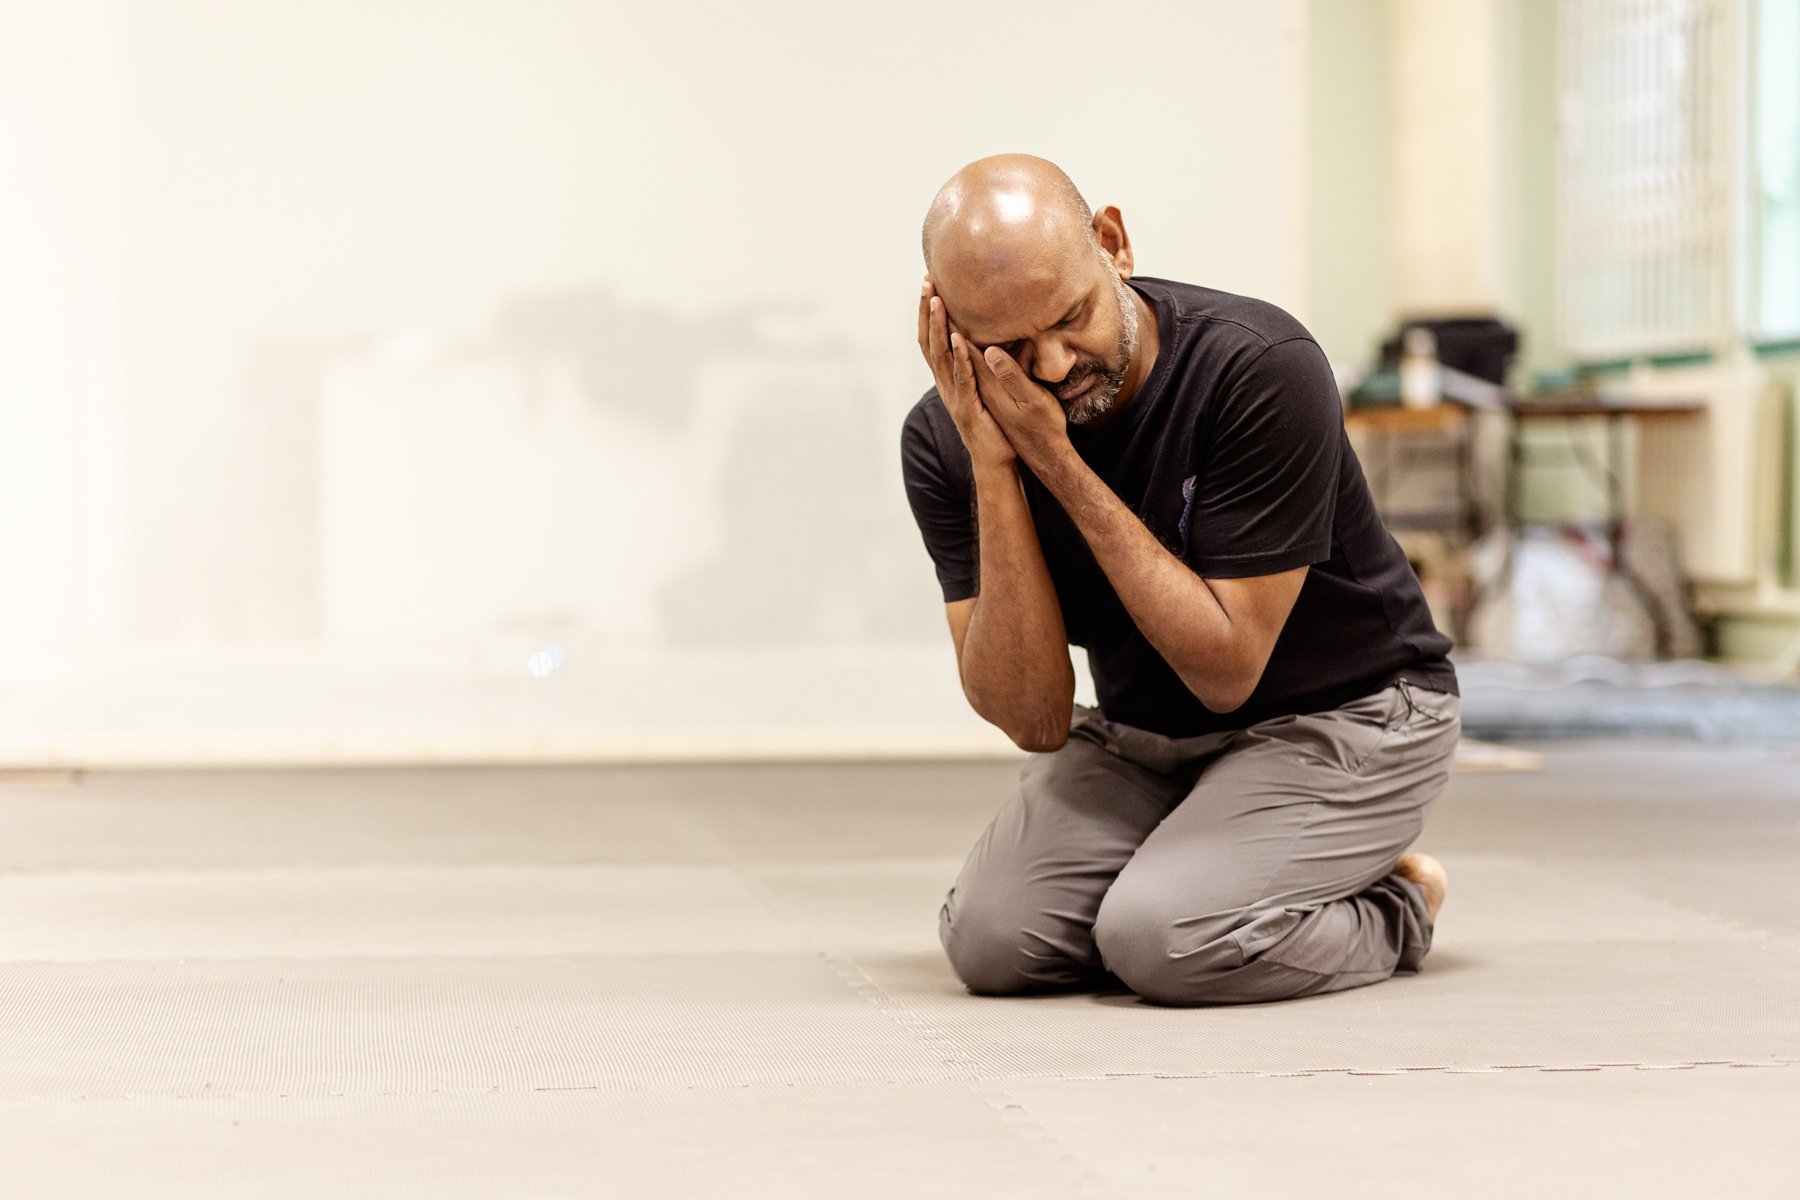  Photo of actor Ramesh Meyyappan in the rehearsal room. He is kneeling with both of his hands cradling his face. His eyes are closed and his head is slightly turned and resting on his hands. 